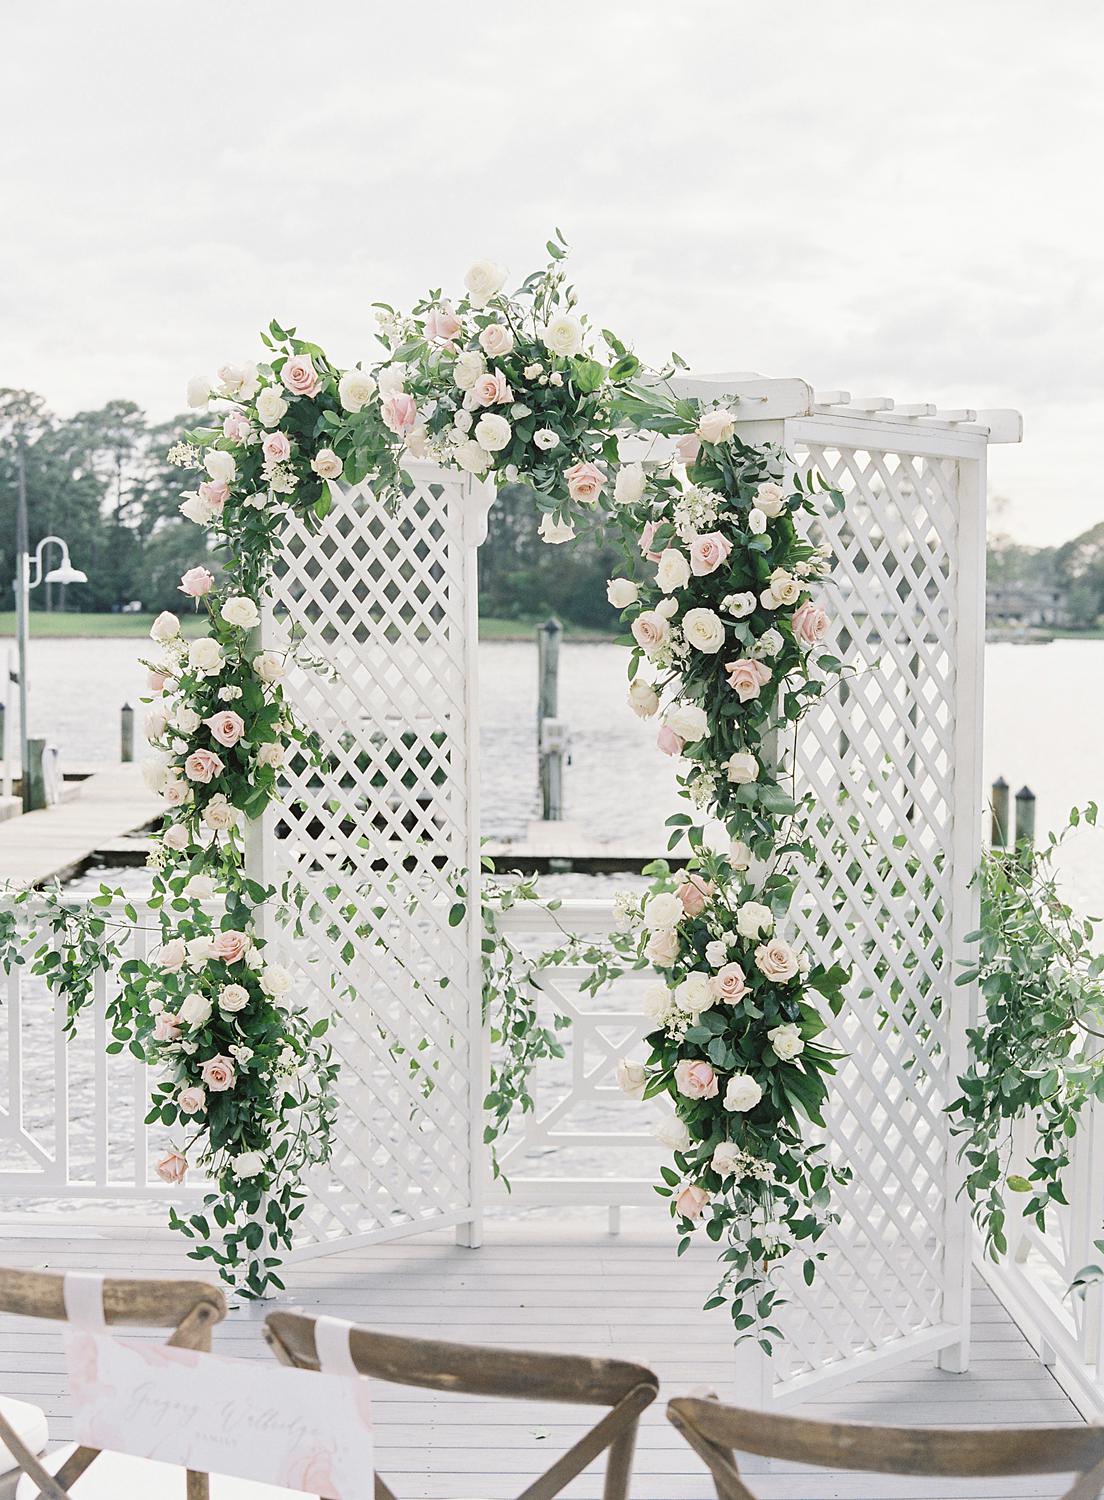 Ivy and rose covered pergola for intimate home wedding